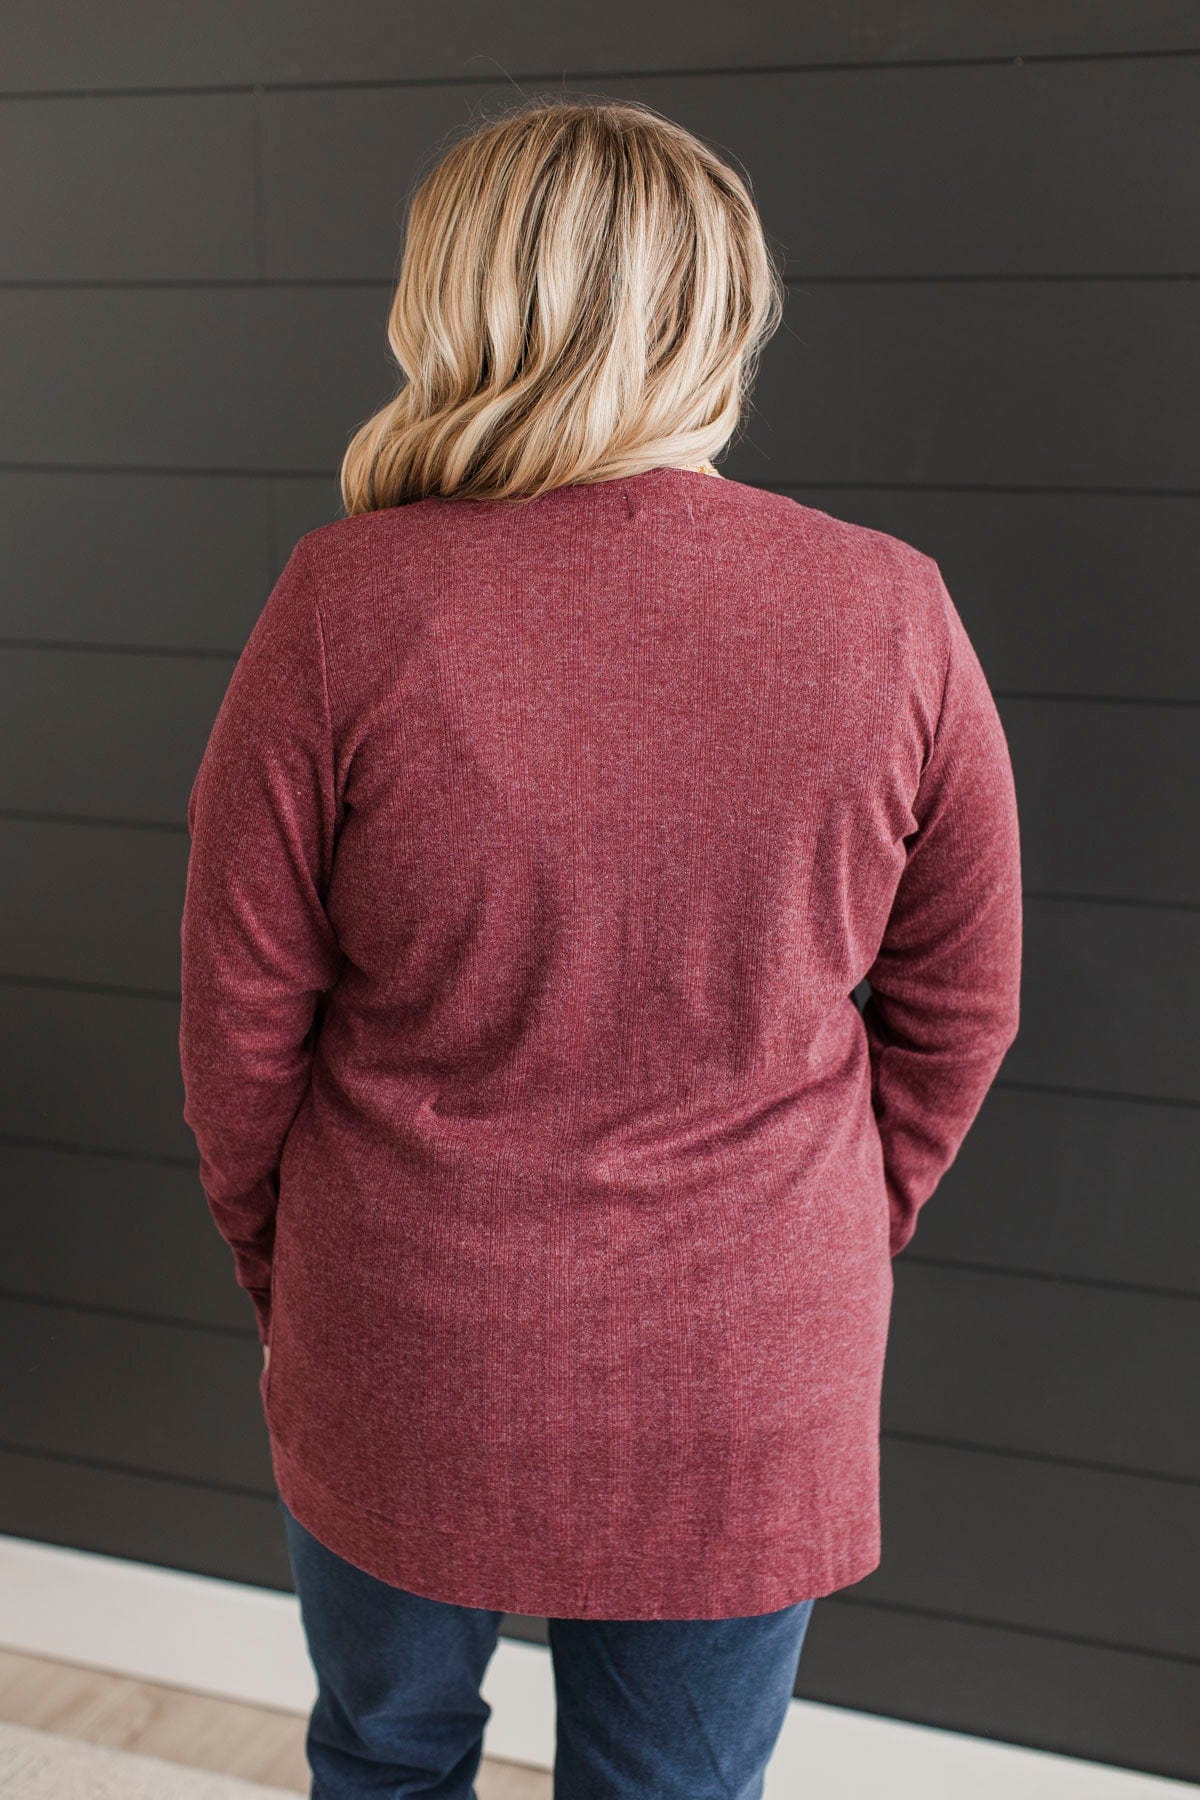 All To Ourselves Knit Cardigan- Dusty Burgundy